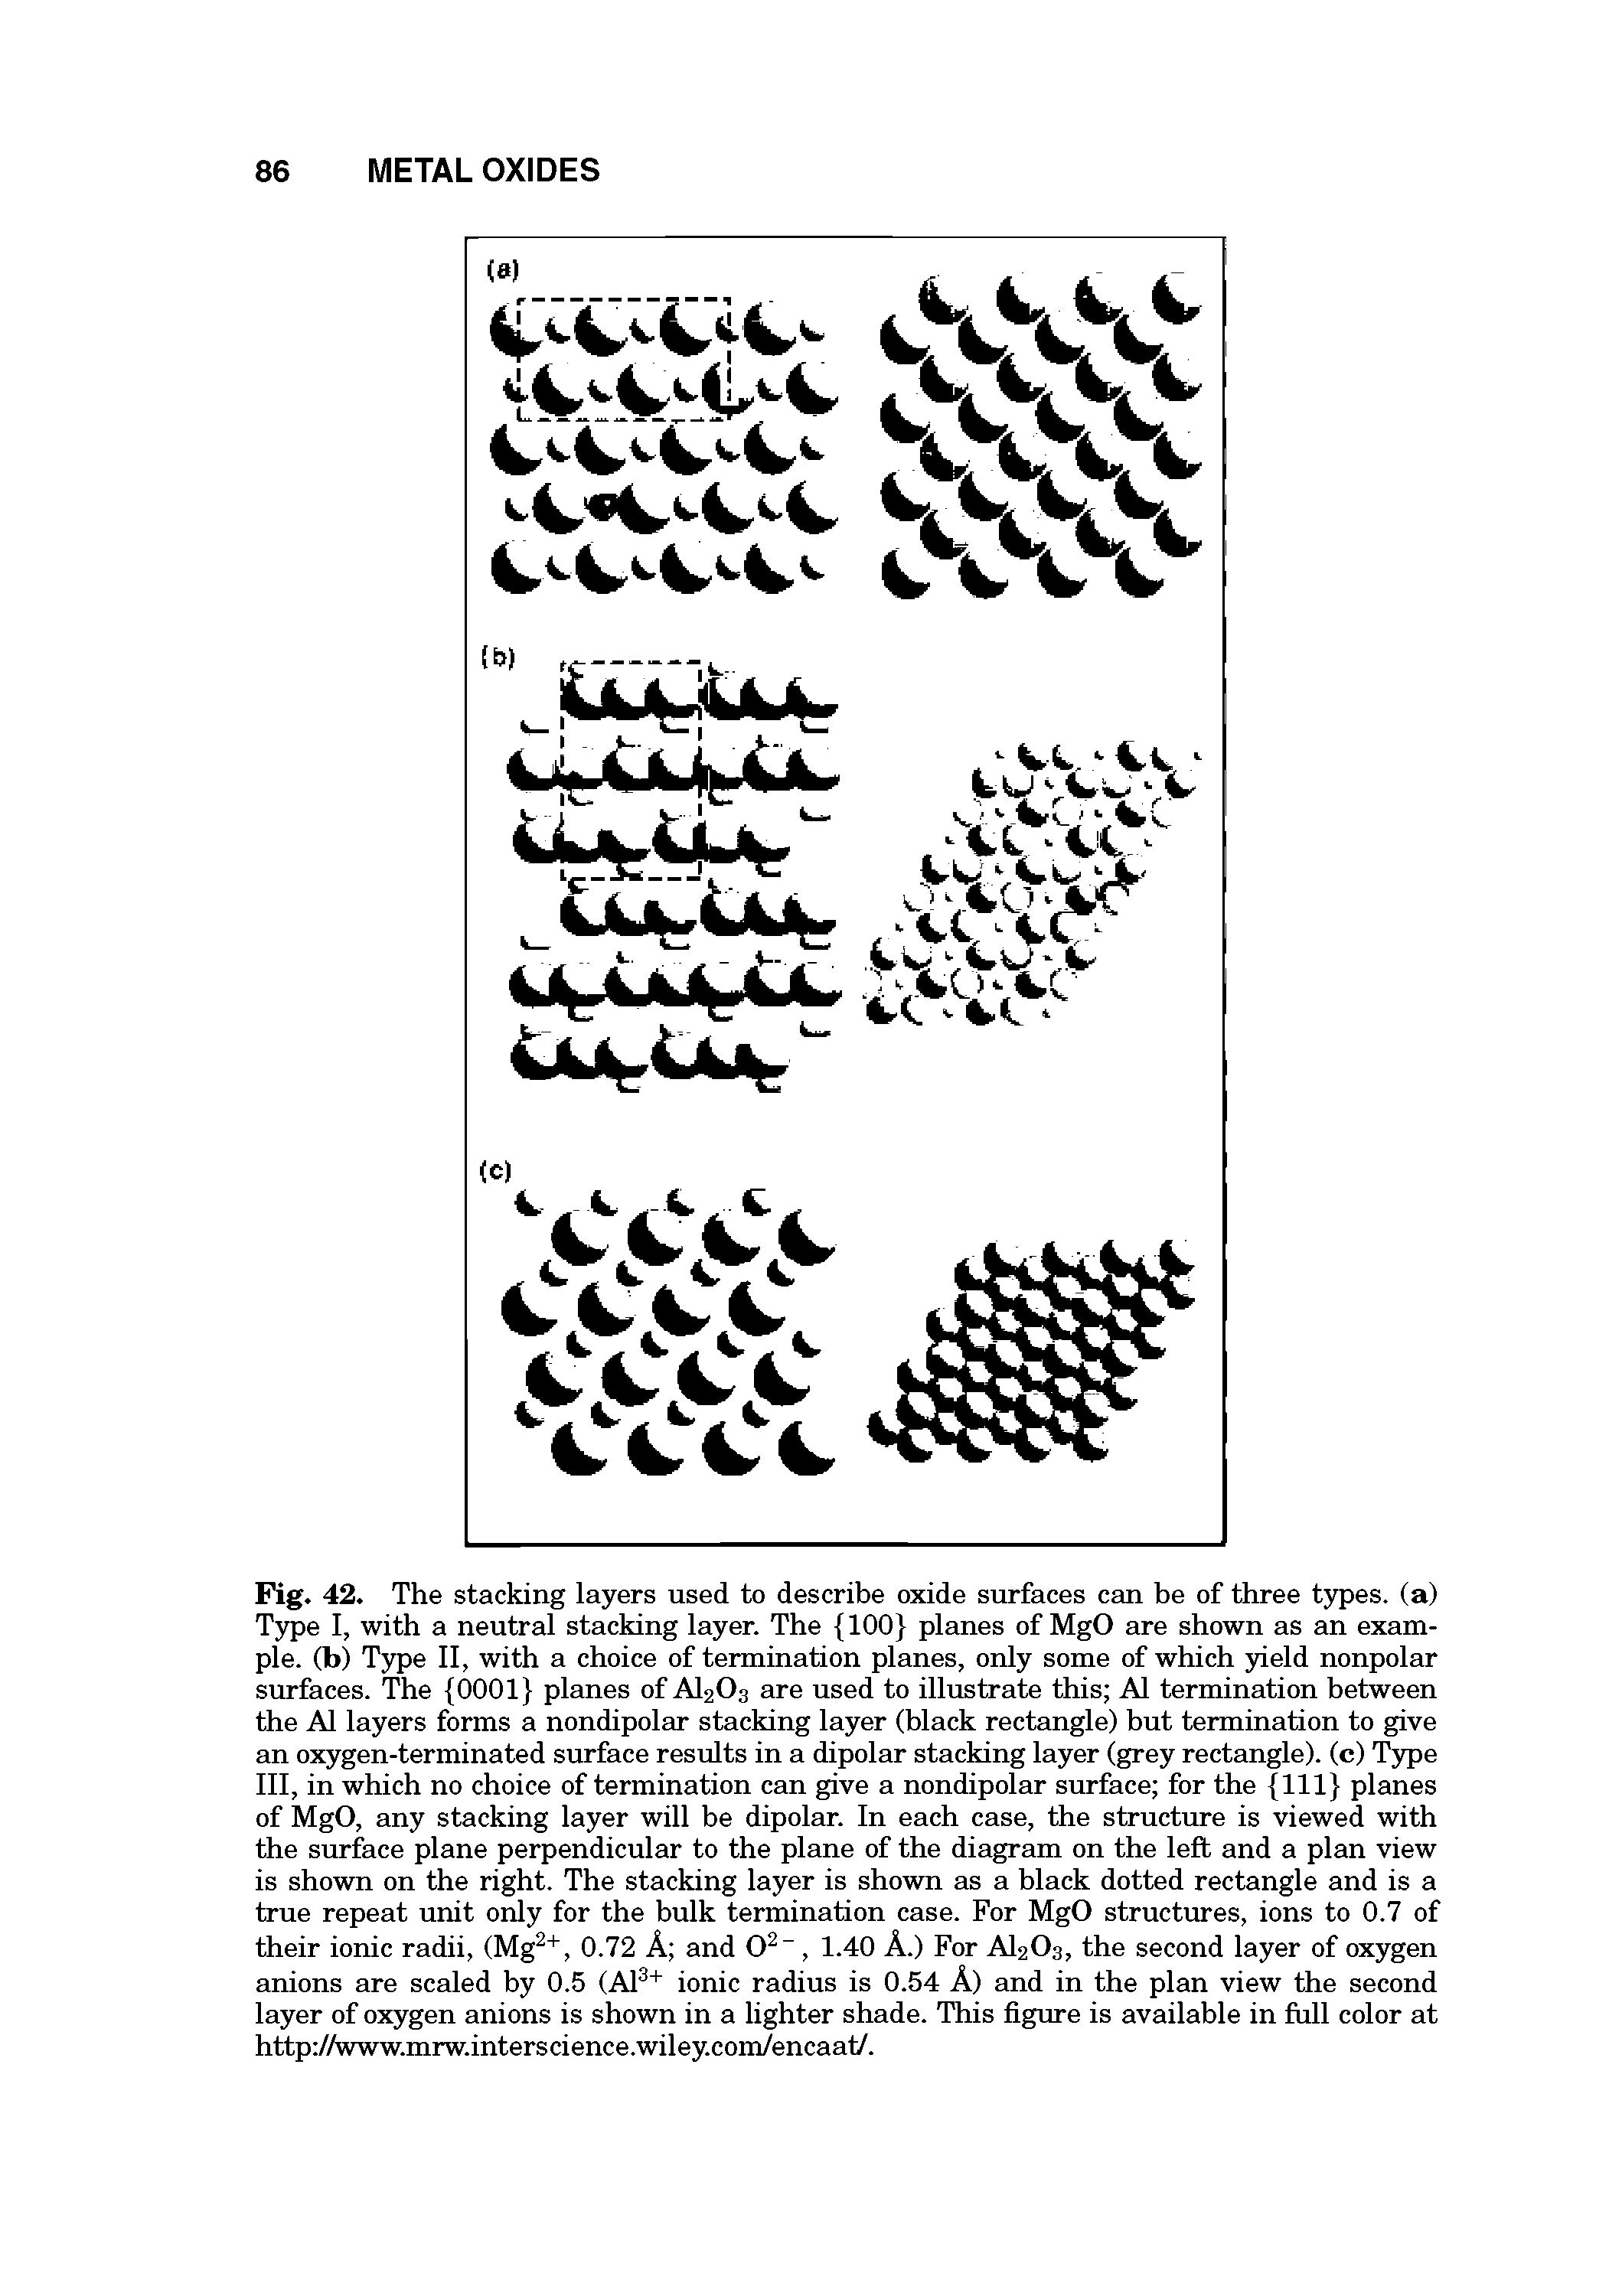 Fig. 42. The stacking layers used to describe oxide surfaces can be of three types, (a) T3 e I, with a neutral stacking layer. The 100 planes of MgO are shown as an example. (b) T5rpe II, with a choice of termination planes, only some of which yield nonpolar surfaces. The 0001 planes of AI2O3 are used to illustrate this A1 termination between the A1 layers forms a nondipolar stacking layer (black rectangle) but termination to give an oxygen-terminated surface results in a dipolar stacking layer (grey rectangle), (c)...